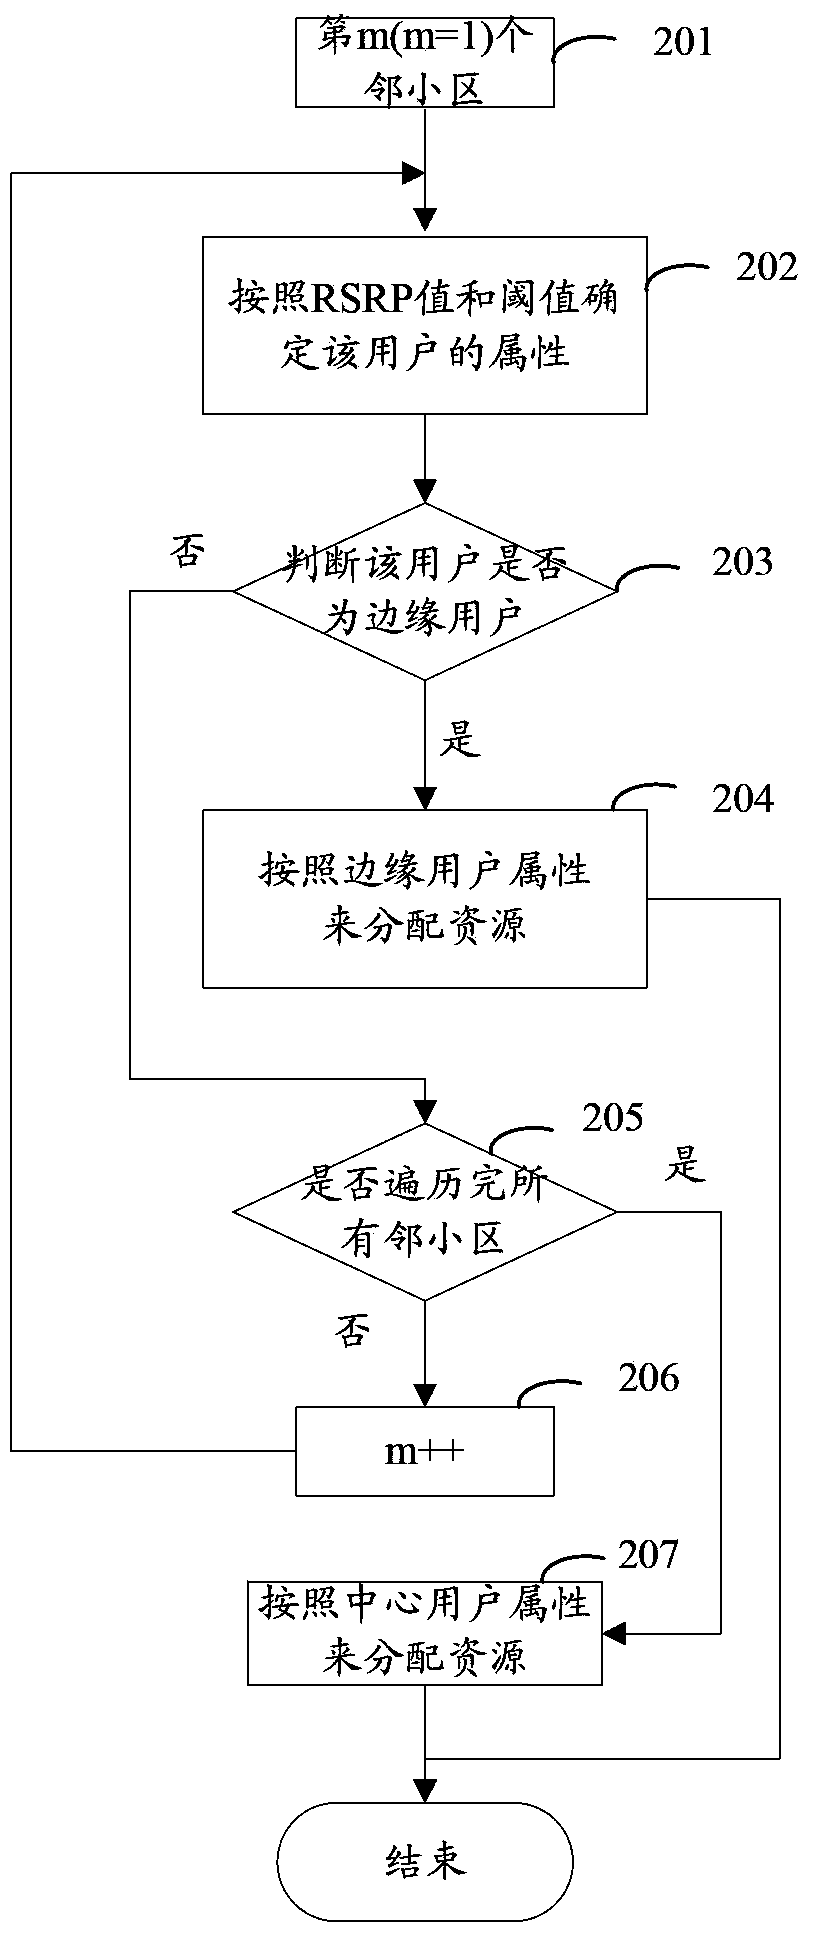 Uplink interference coordinating method applied to irregular networking